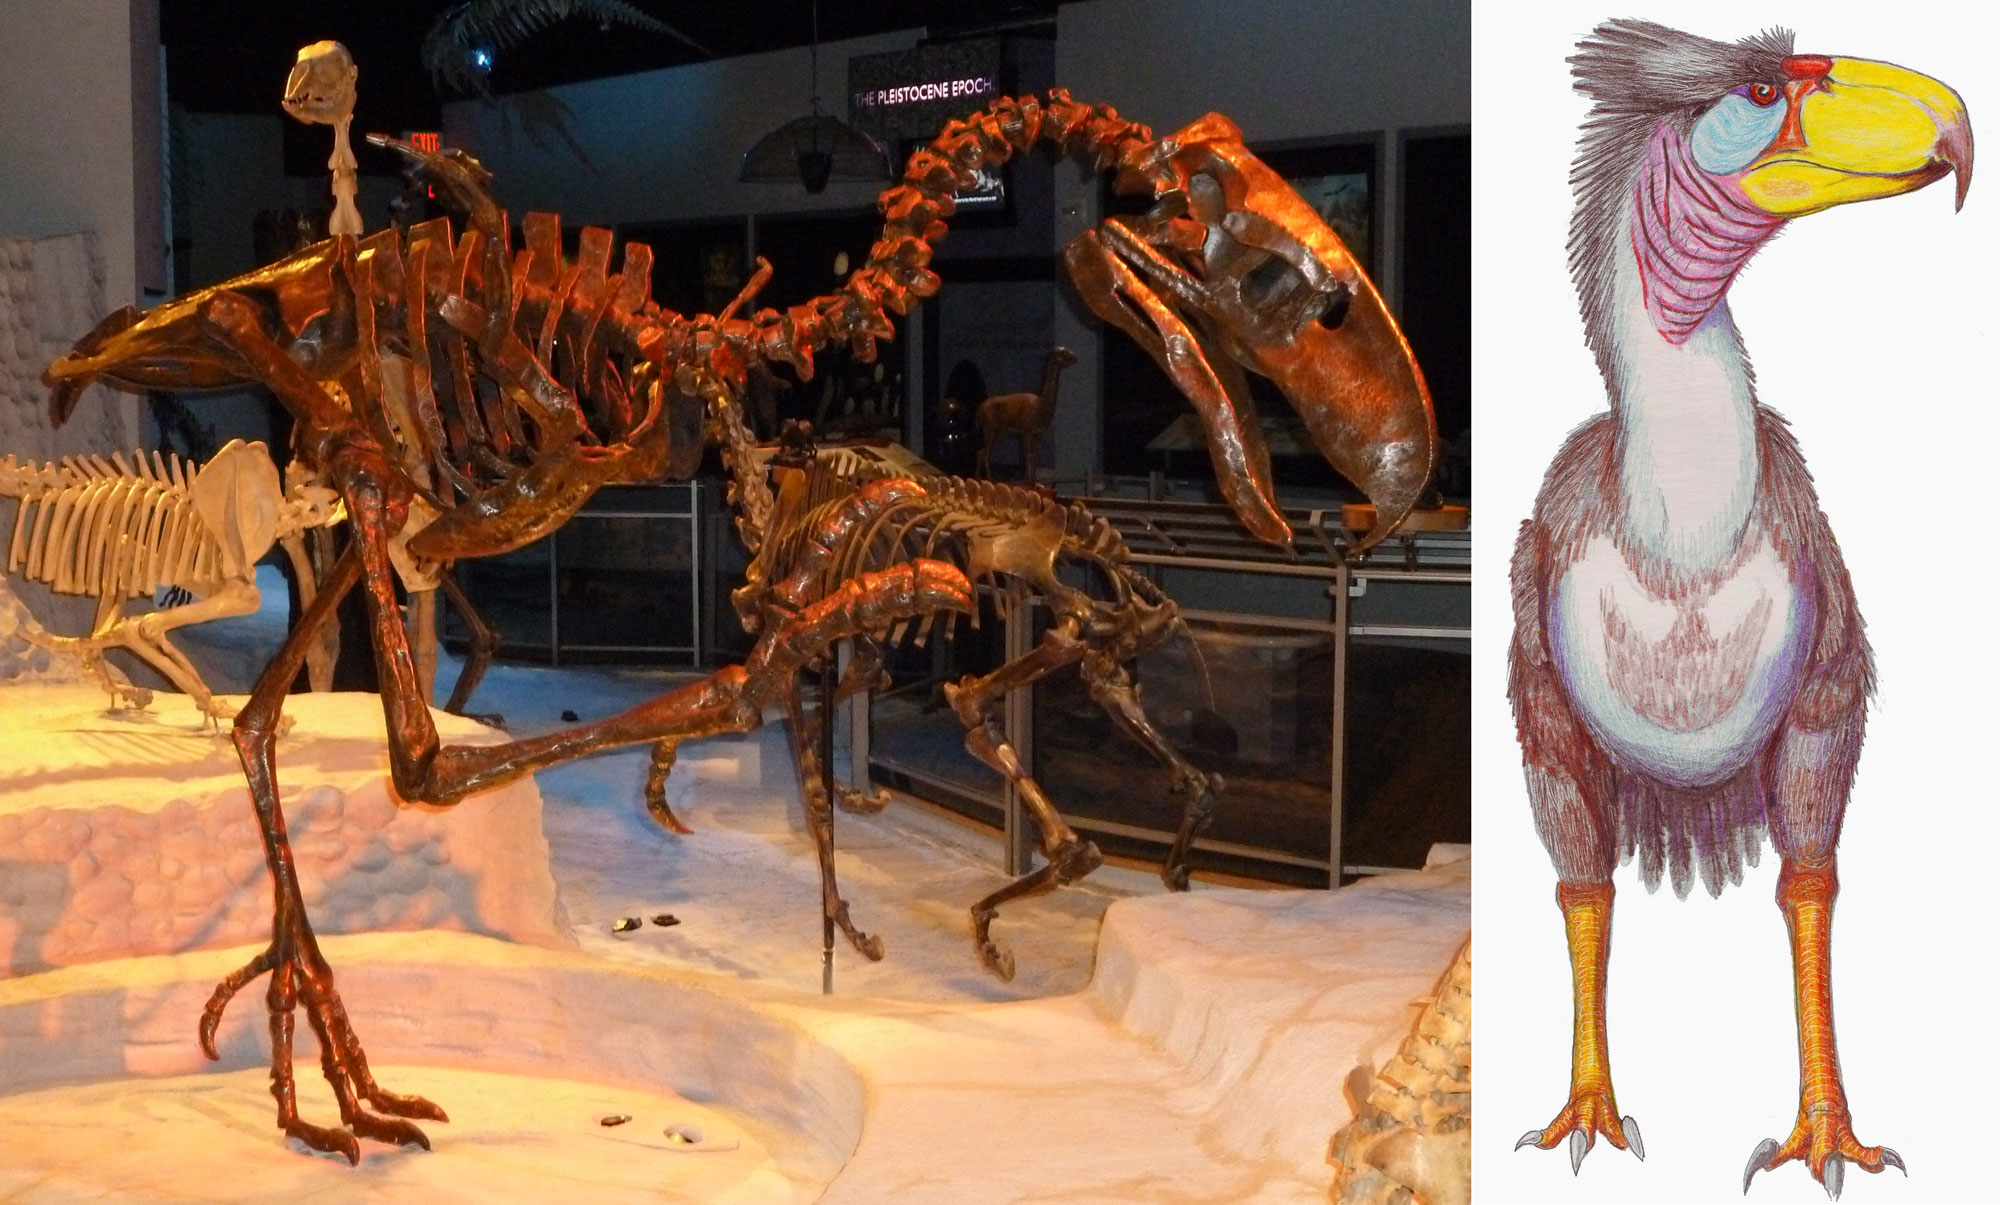 2-Panel figure of Waller's terror bird. Panel 1: Photo of a mounted skeleton of a terrestrial bird with a large head and beak on display at the Florida Museum of Natural History. Panel 2: Drawing showing a reconstruction of the living bird with a colorful head.